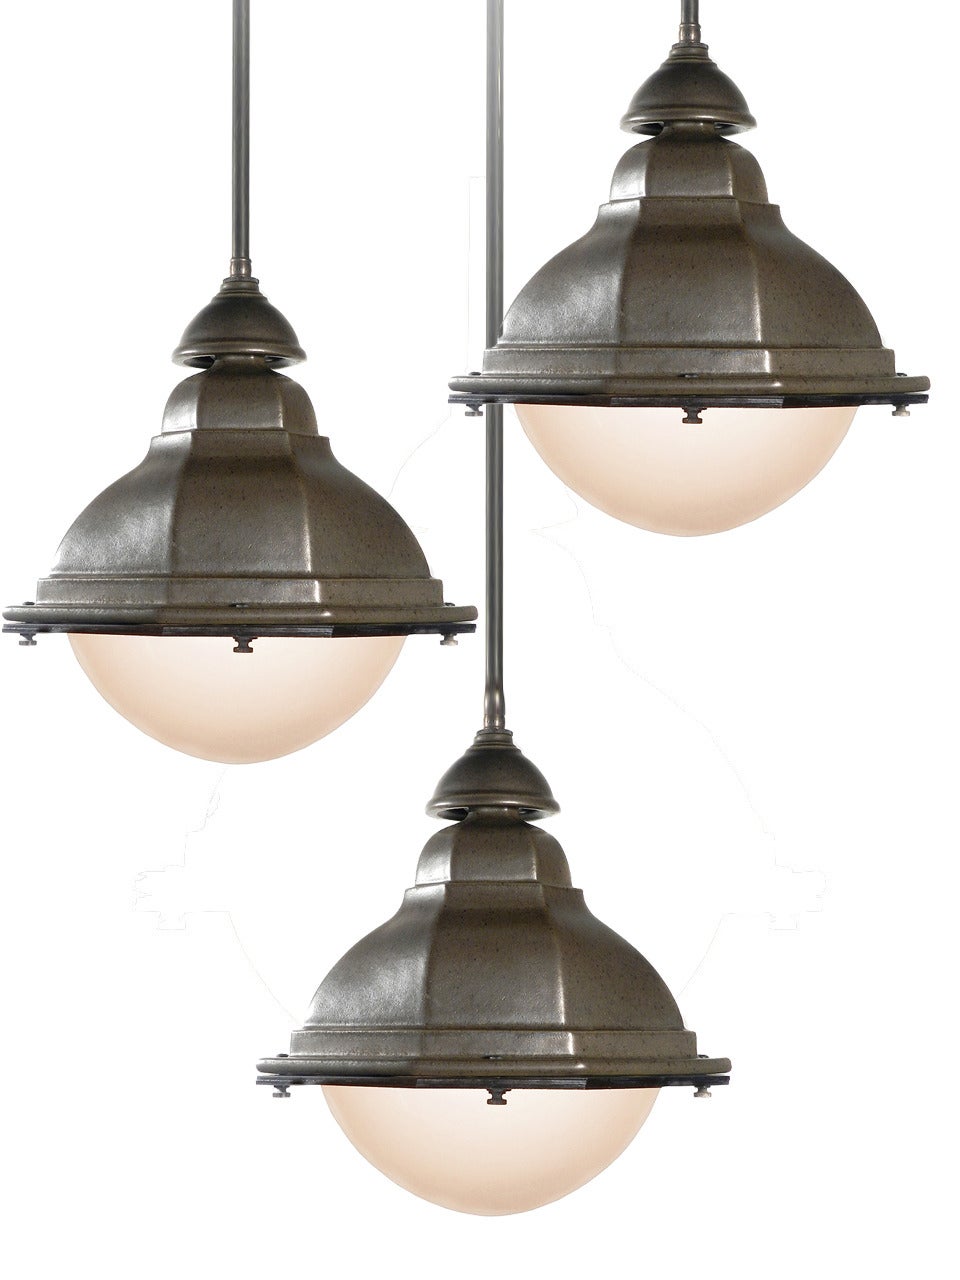 This is a beautifully glazed heavy terracotta lamps was inspired by turn-of-the-century cast iron French street lights. The finish is kiln fired producing a subtle patina in a dark matte green gray. It has the feel and finish of Teco pottery. It has